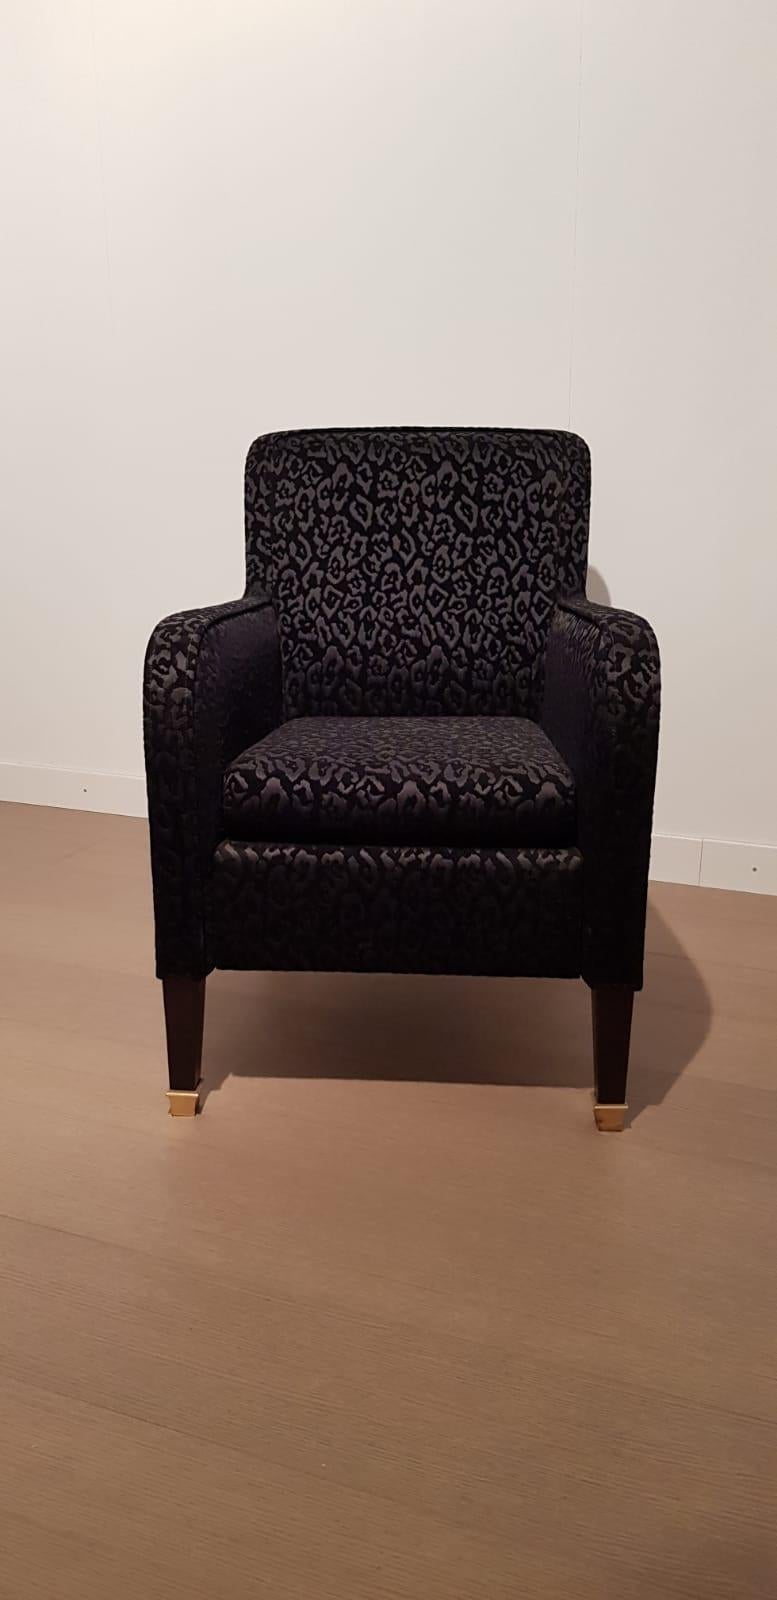 Italian armchair contemporary classic armchair Design by Anna Gili Milan Made in Italy For Sale